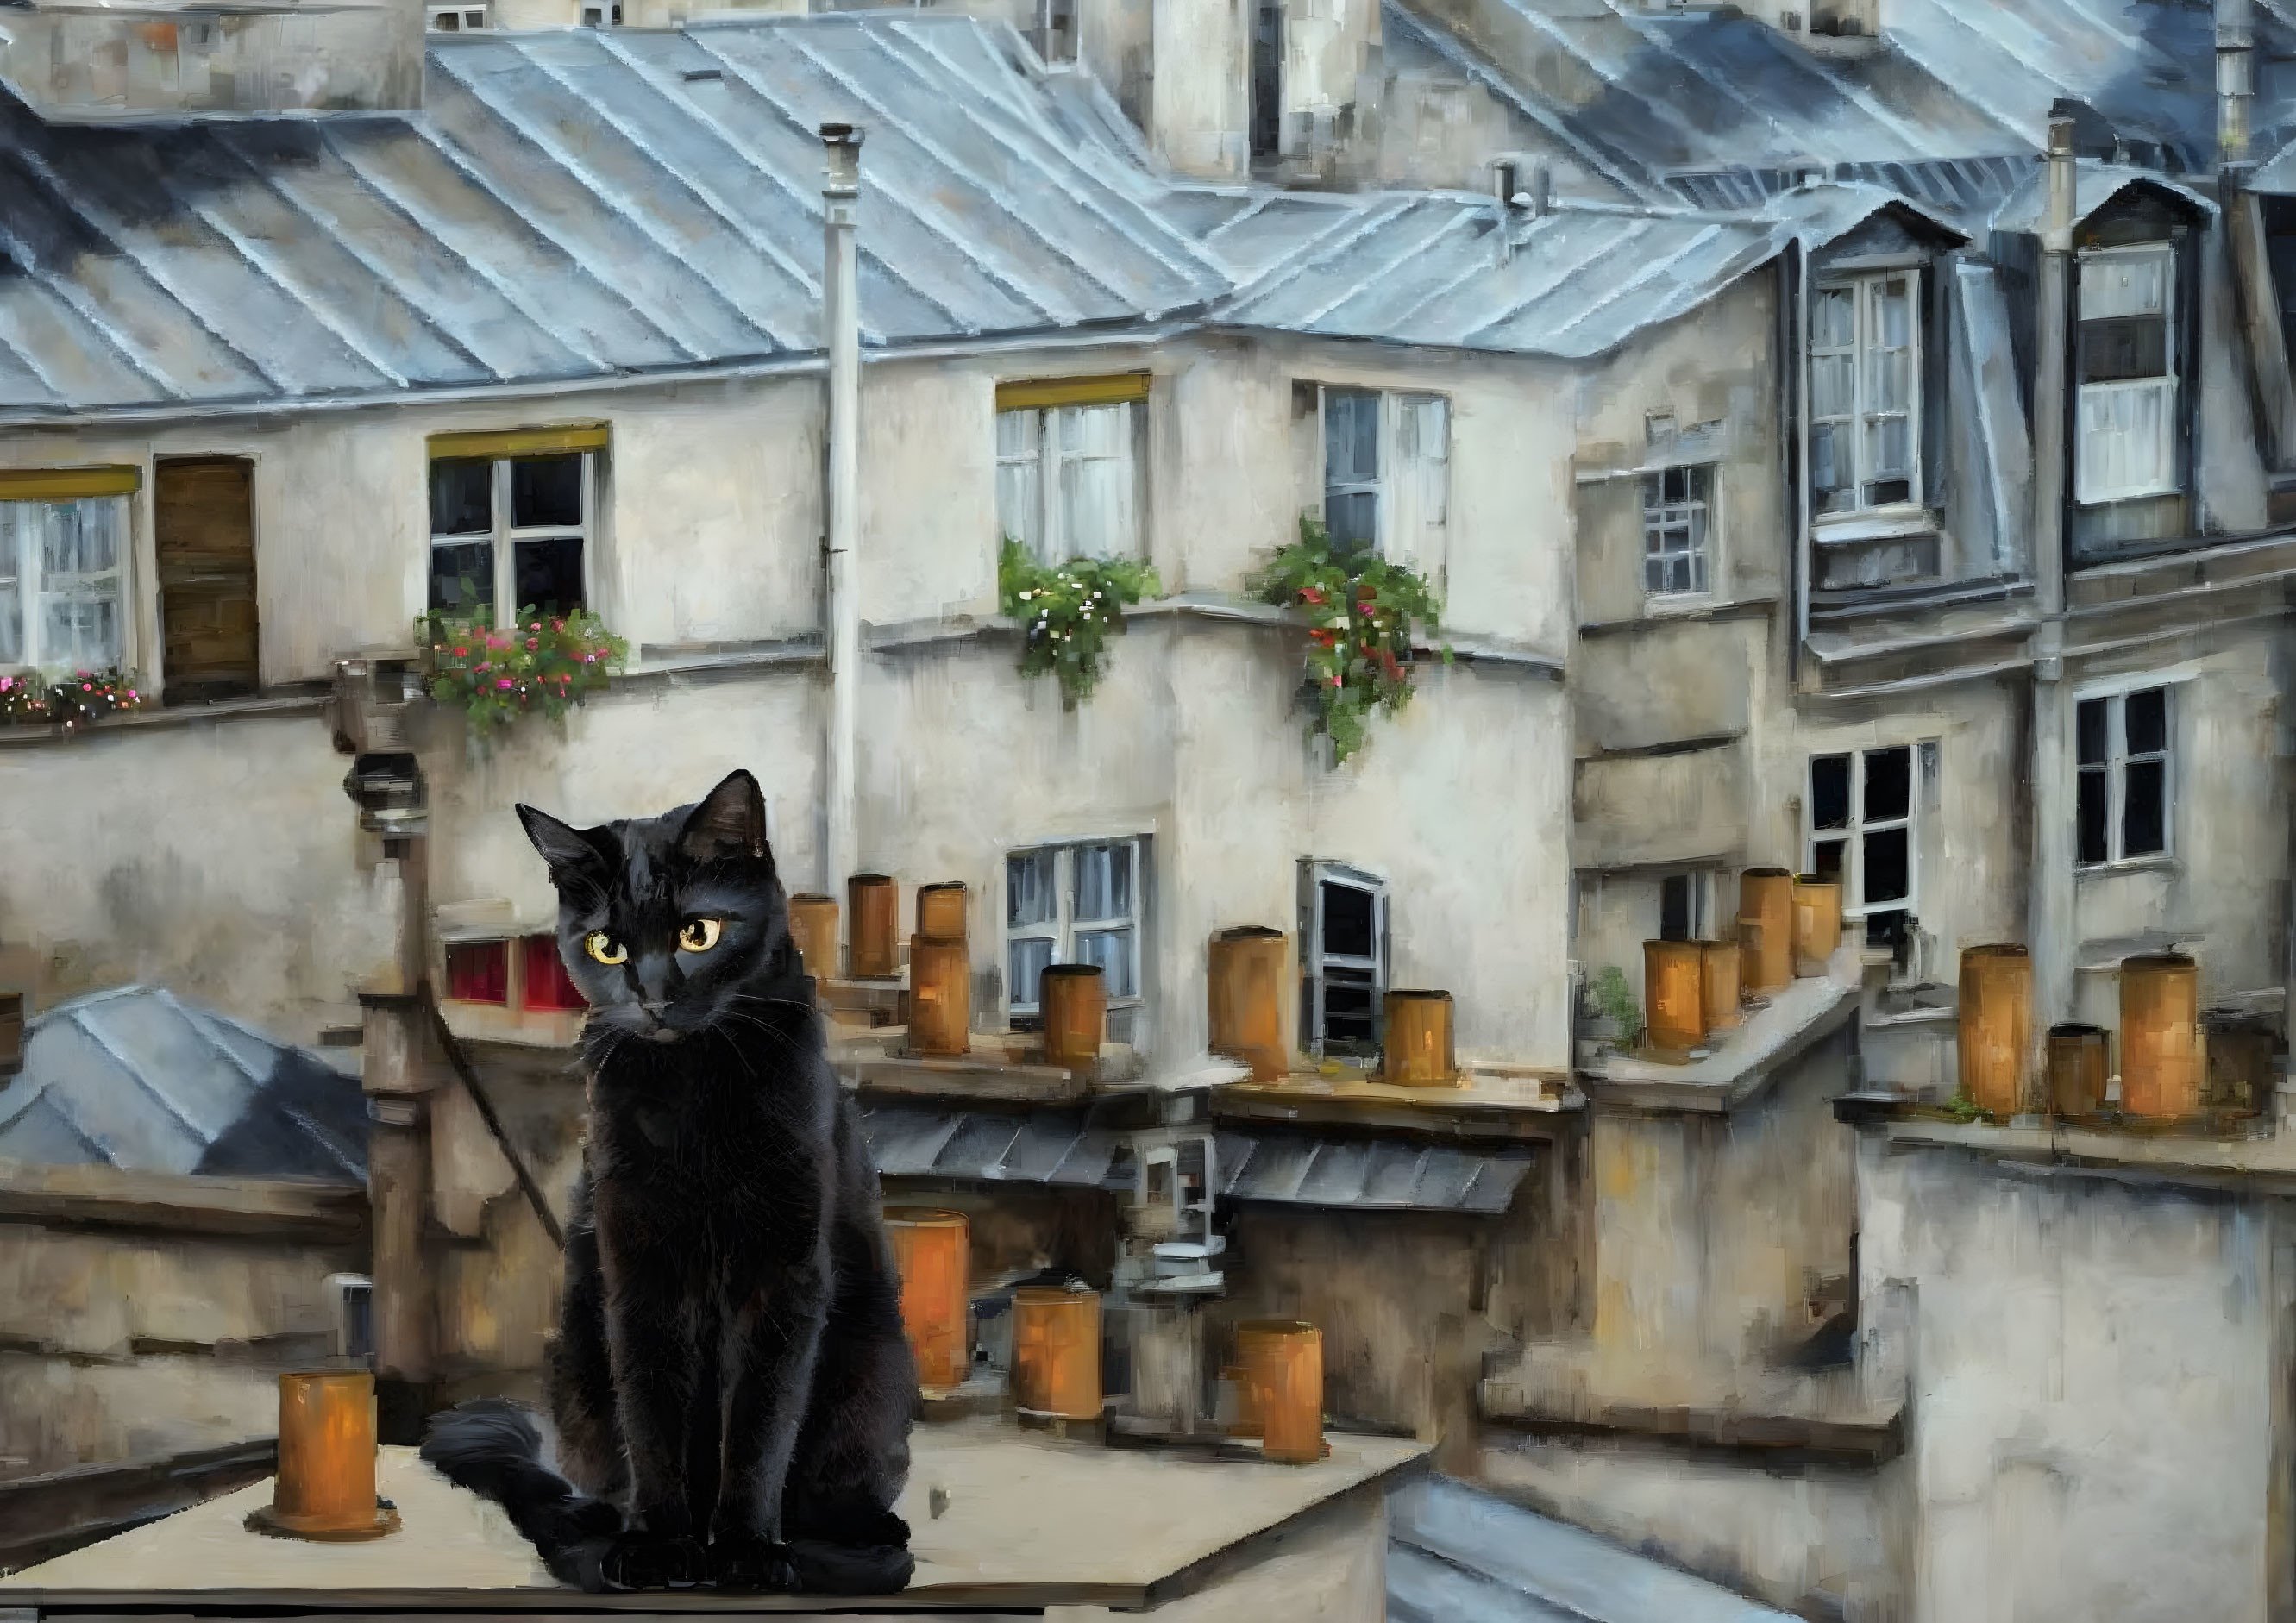 The black cat on the roof of Paris